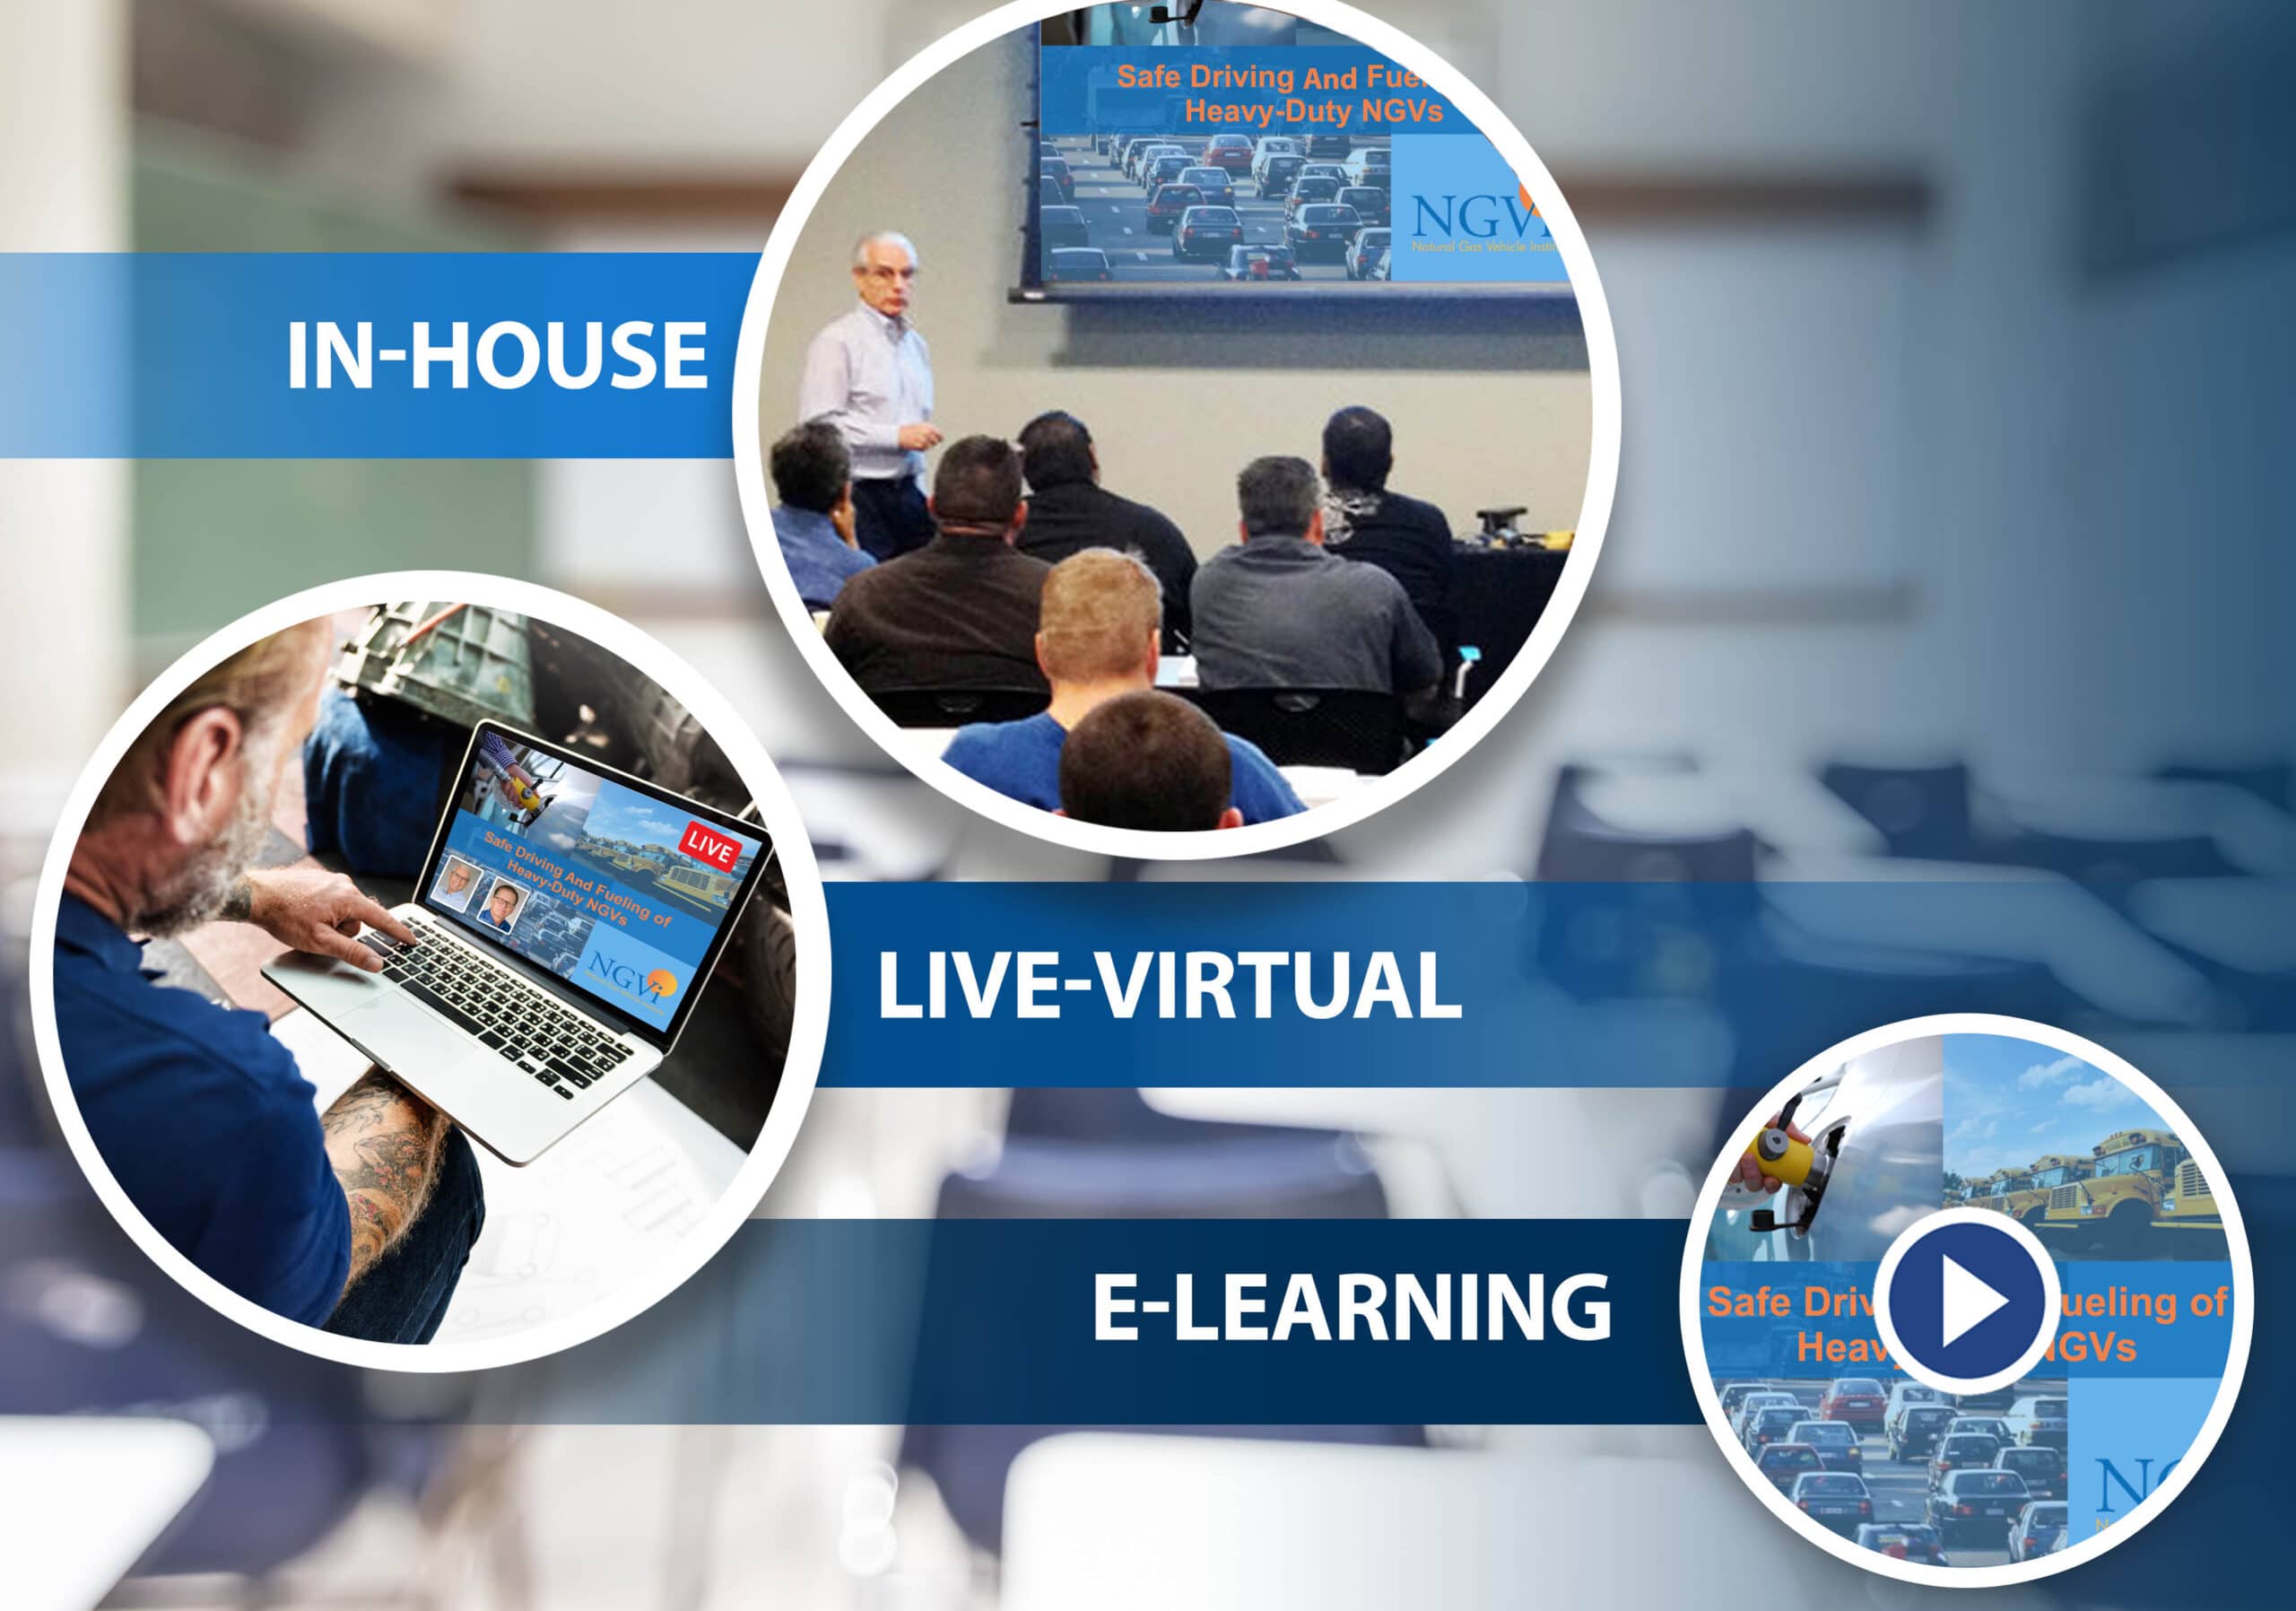 NGVi training options concept: in-house training in a classroom, live-virtual training on a laptop, and e-learning training with prerecorded lessons.